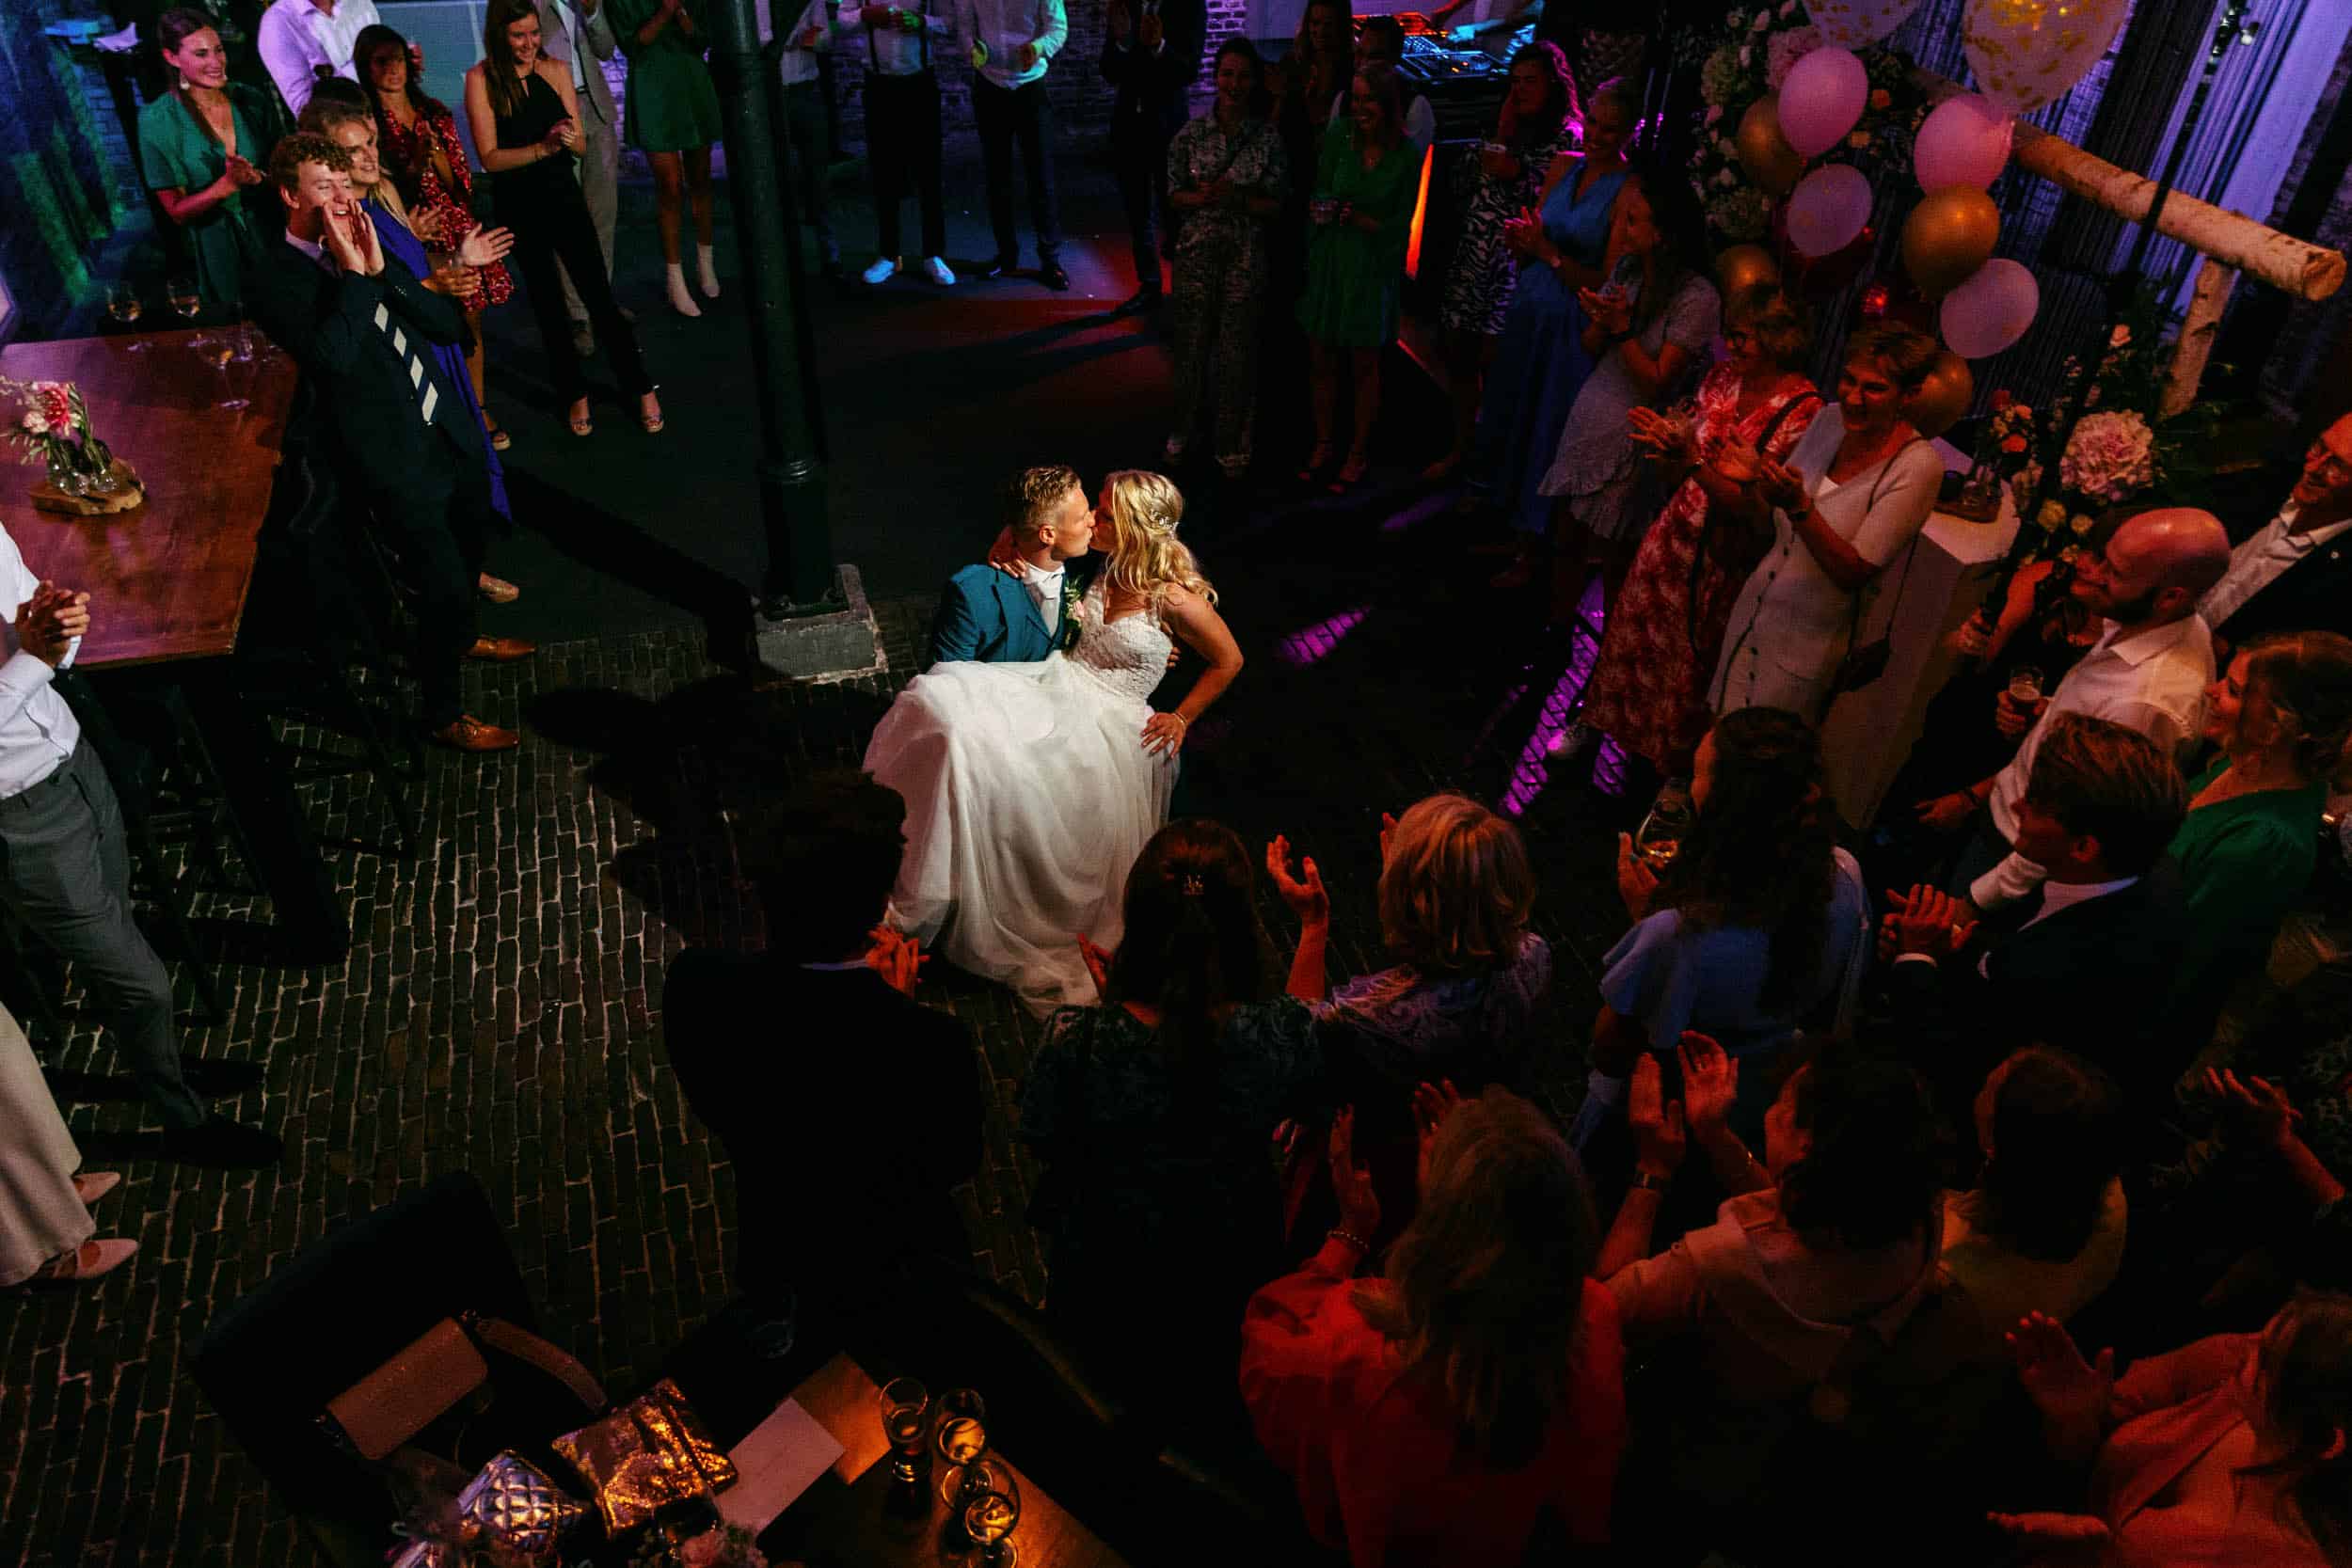 A bride and groom at a wedding party in a bar.